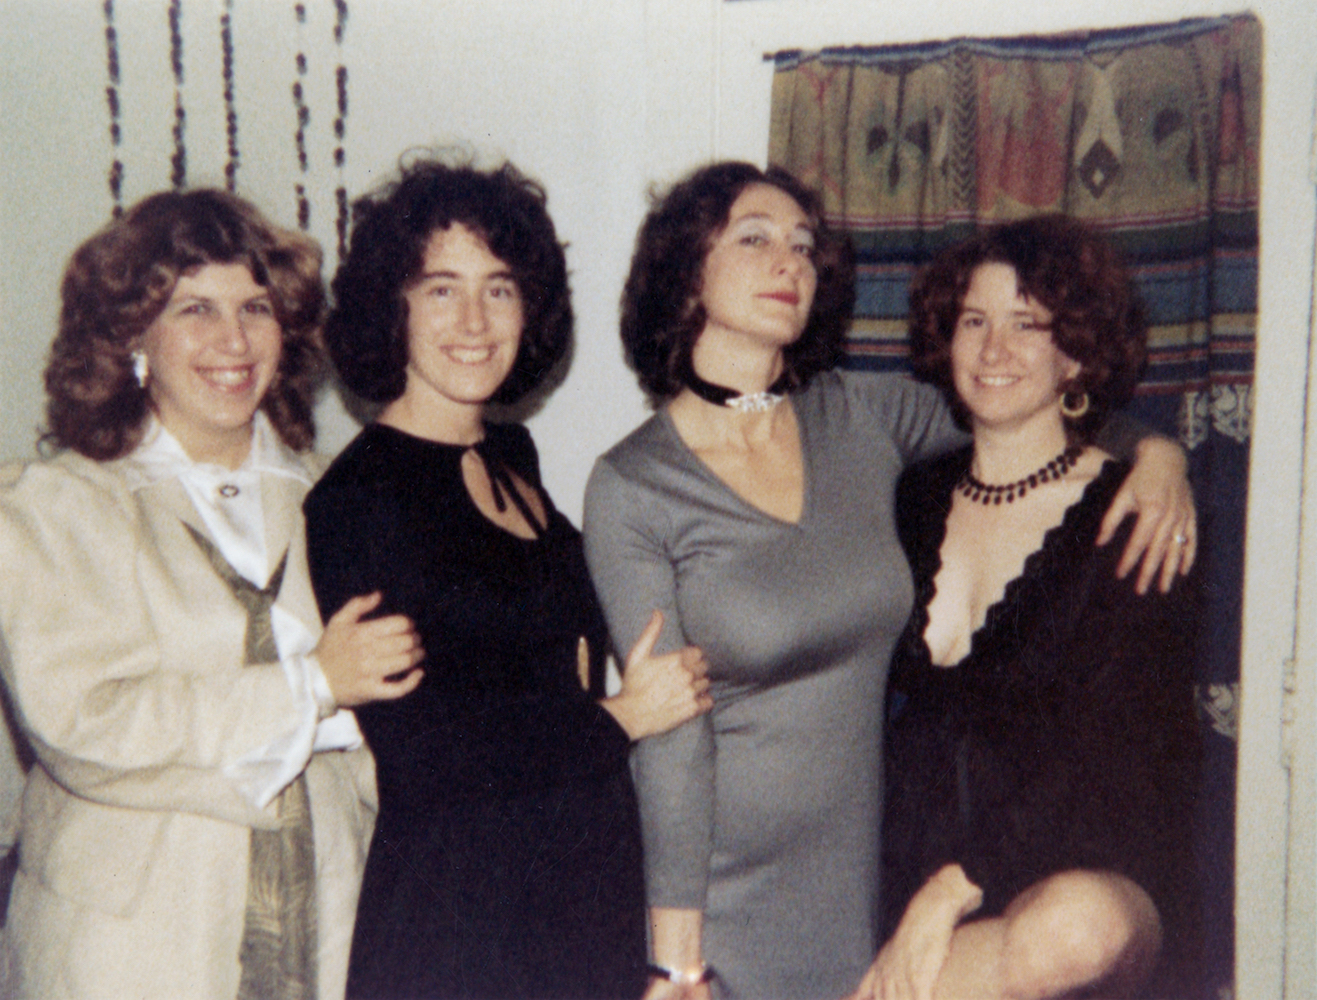 Terry as a “newly-minted lesbian” on New Year’s Eve, 1976. L-R: Carolyn Myers, her collaborator; Nancy Baum, her sister; Terry Baum; Sherry McVickar, her first woman lover. Photo courtesy of Terry Baum.